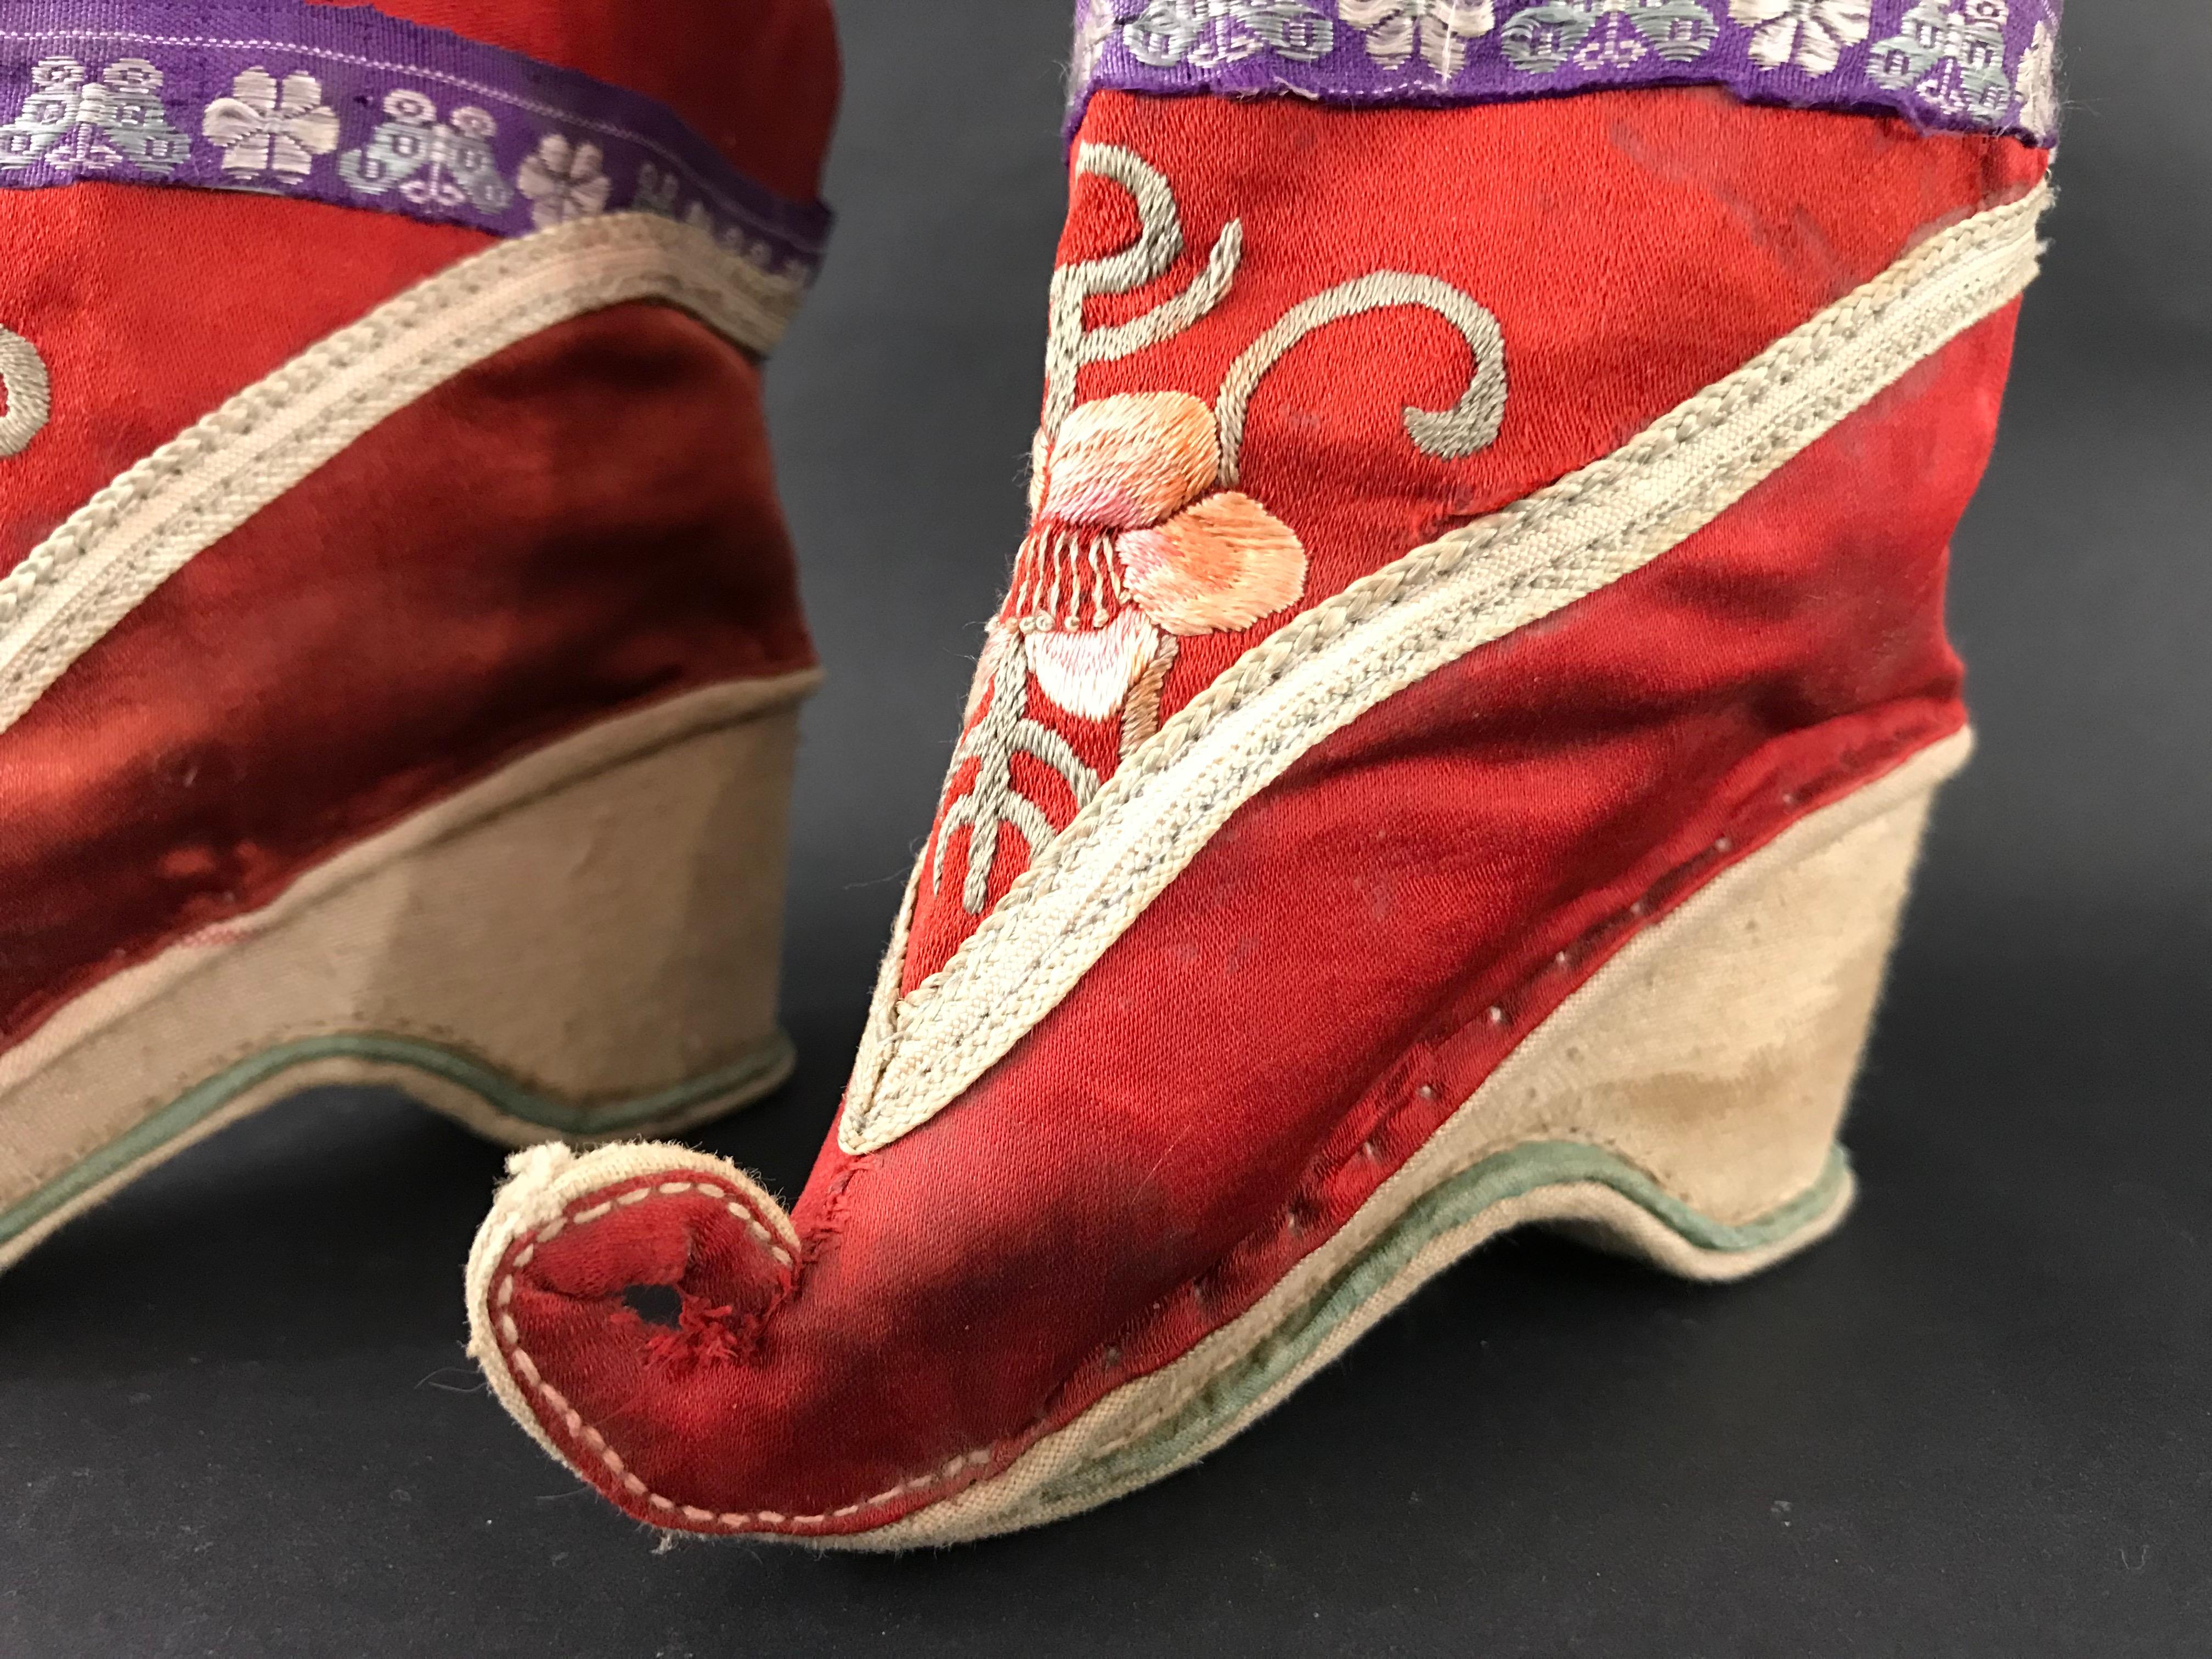 Woman's shoe with bandaged feet, in embroidered satin.
The custom of bandaged feet is said to have appeared in China in the 10th century during the Tang dynasty, when the emperor asked his concubine to bandage his feet to perform the lotus dance